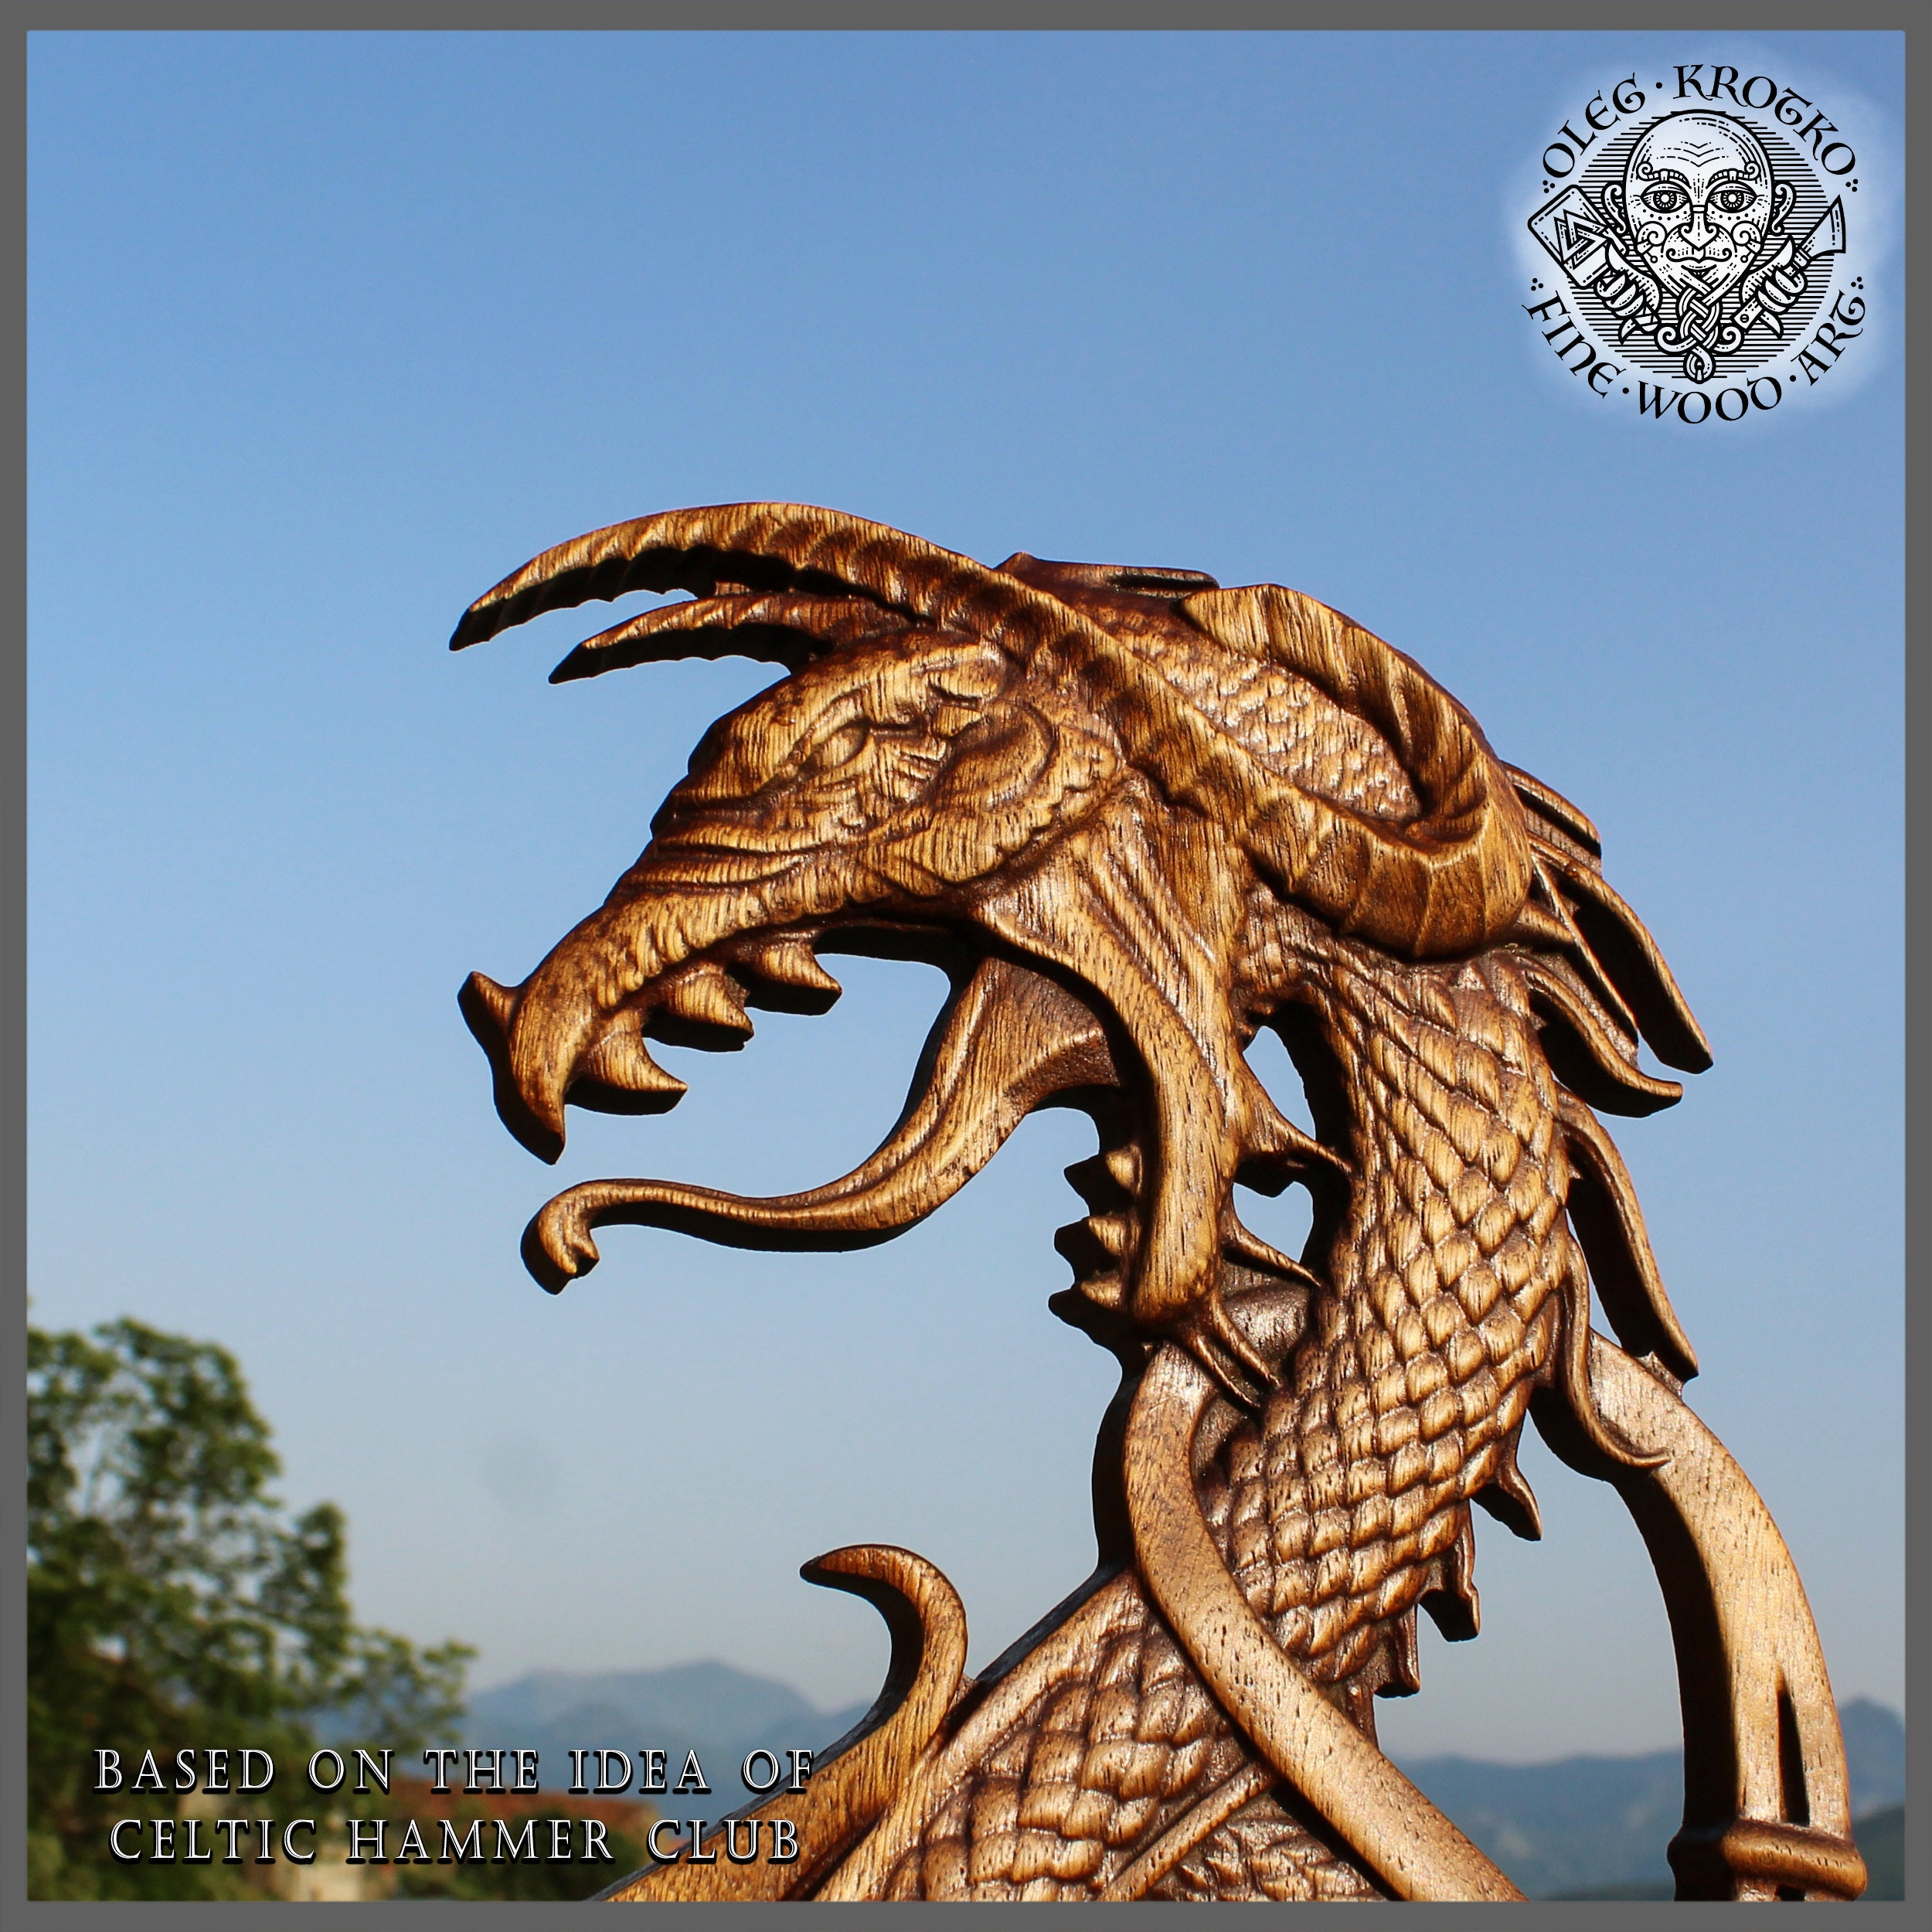 Kundalini Dragons Norse Wood Carving Wall Art - Forged in Wood